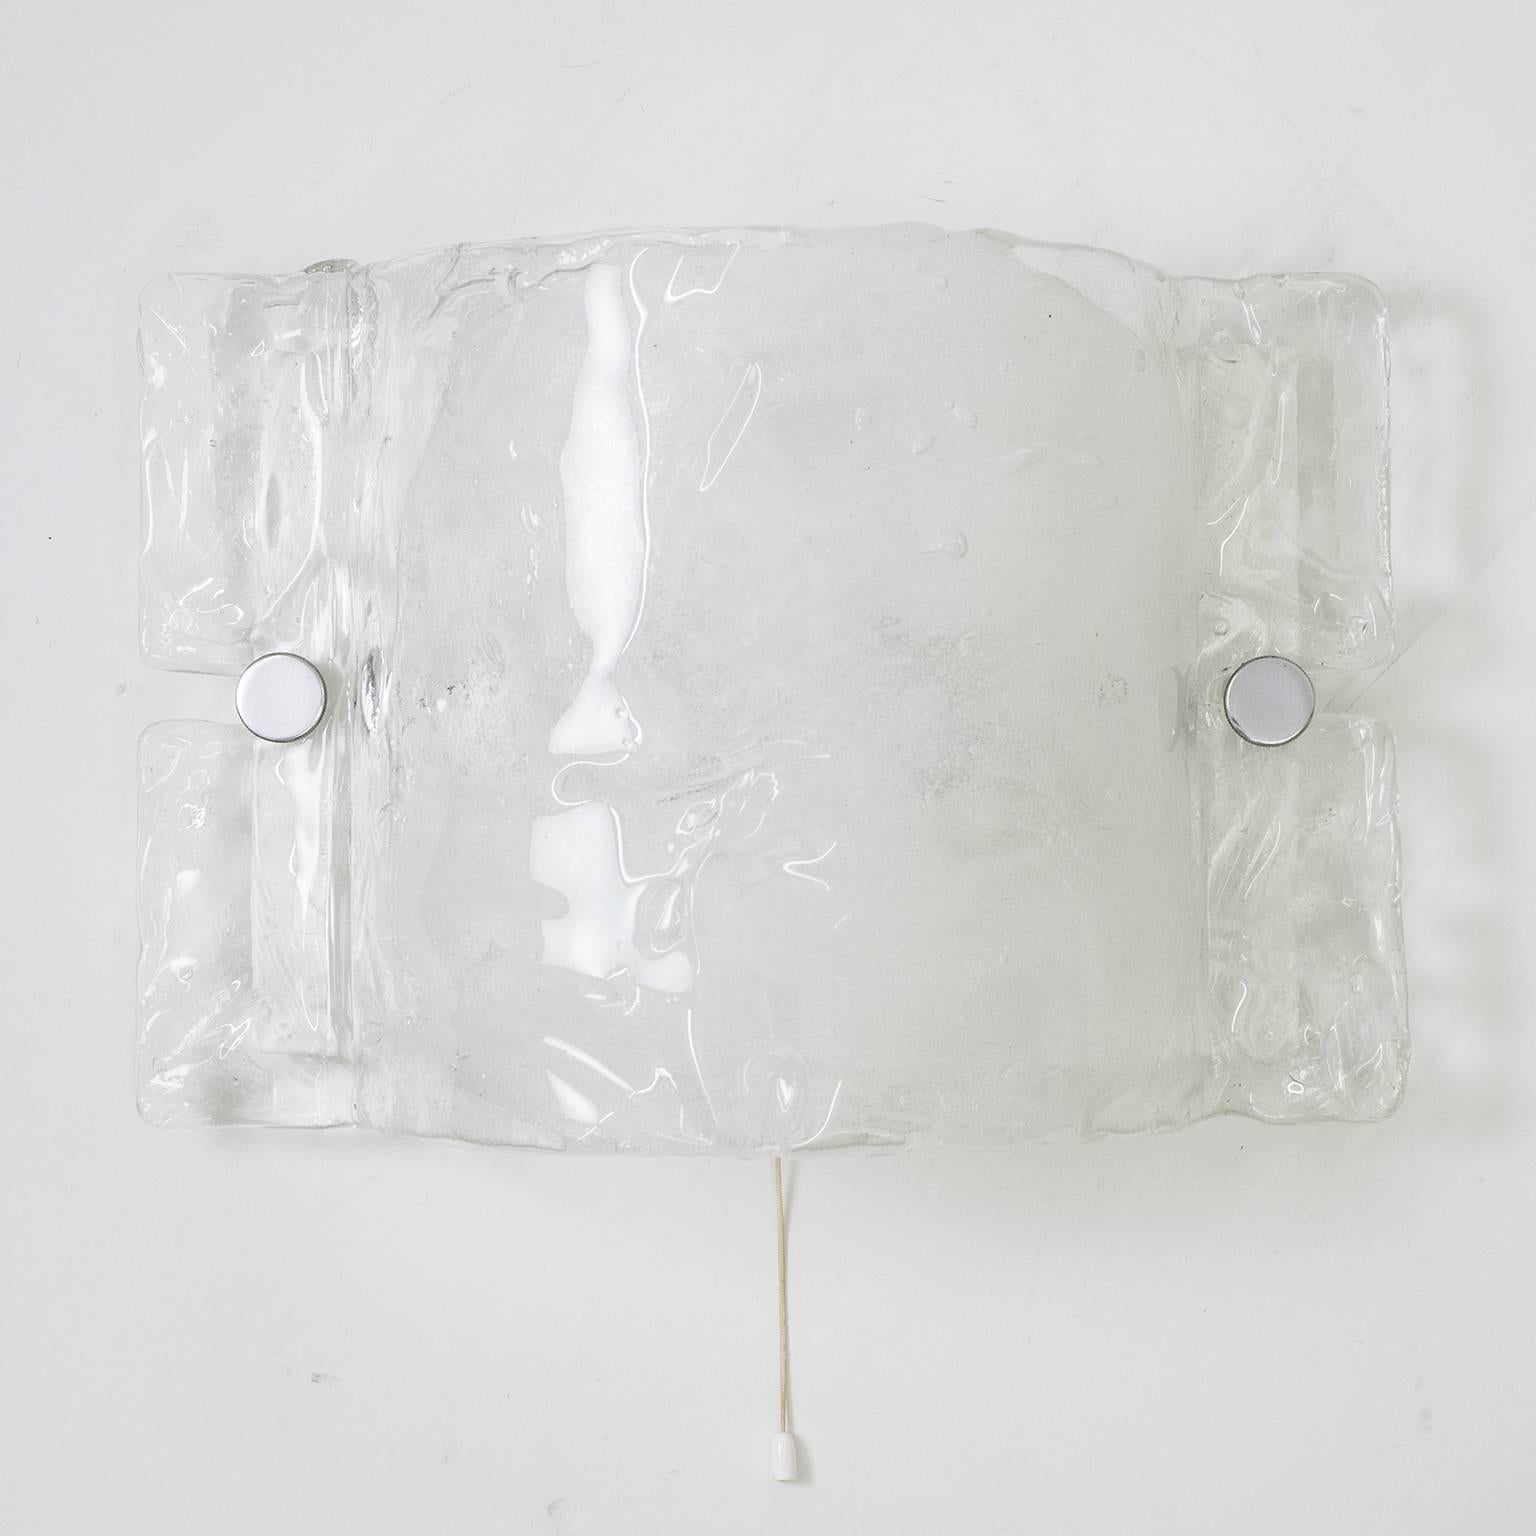 Very ethereal 1970s Kalmar wall light. It's got a white lacquered backplate and a large heavily textured and curved diffuser made of transparent glass with large brush strokes of tiny bubbles in the centre covering the two original E14 sockets.